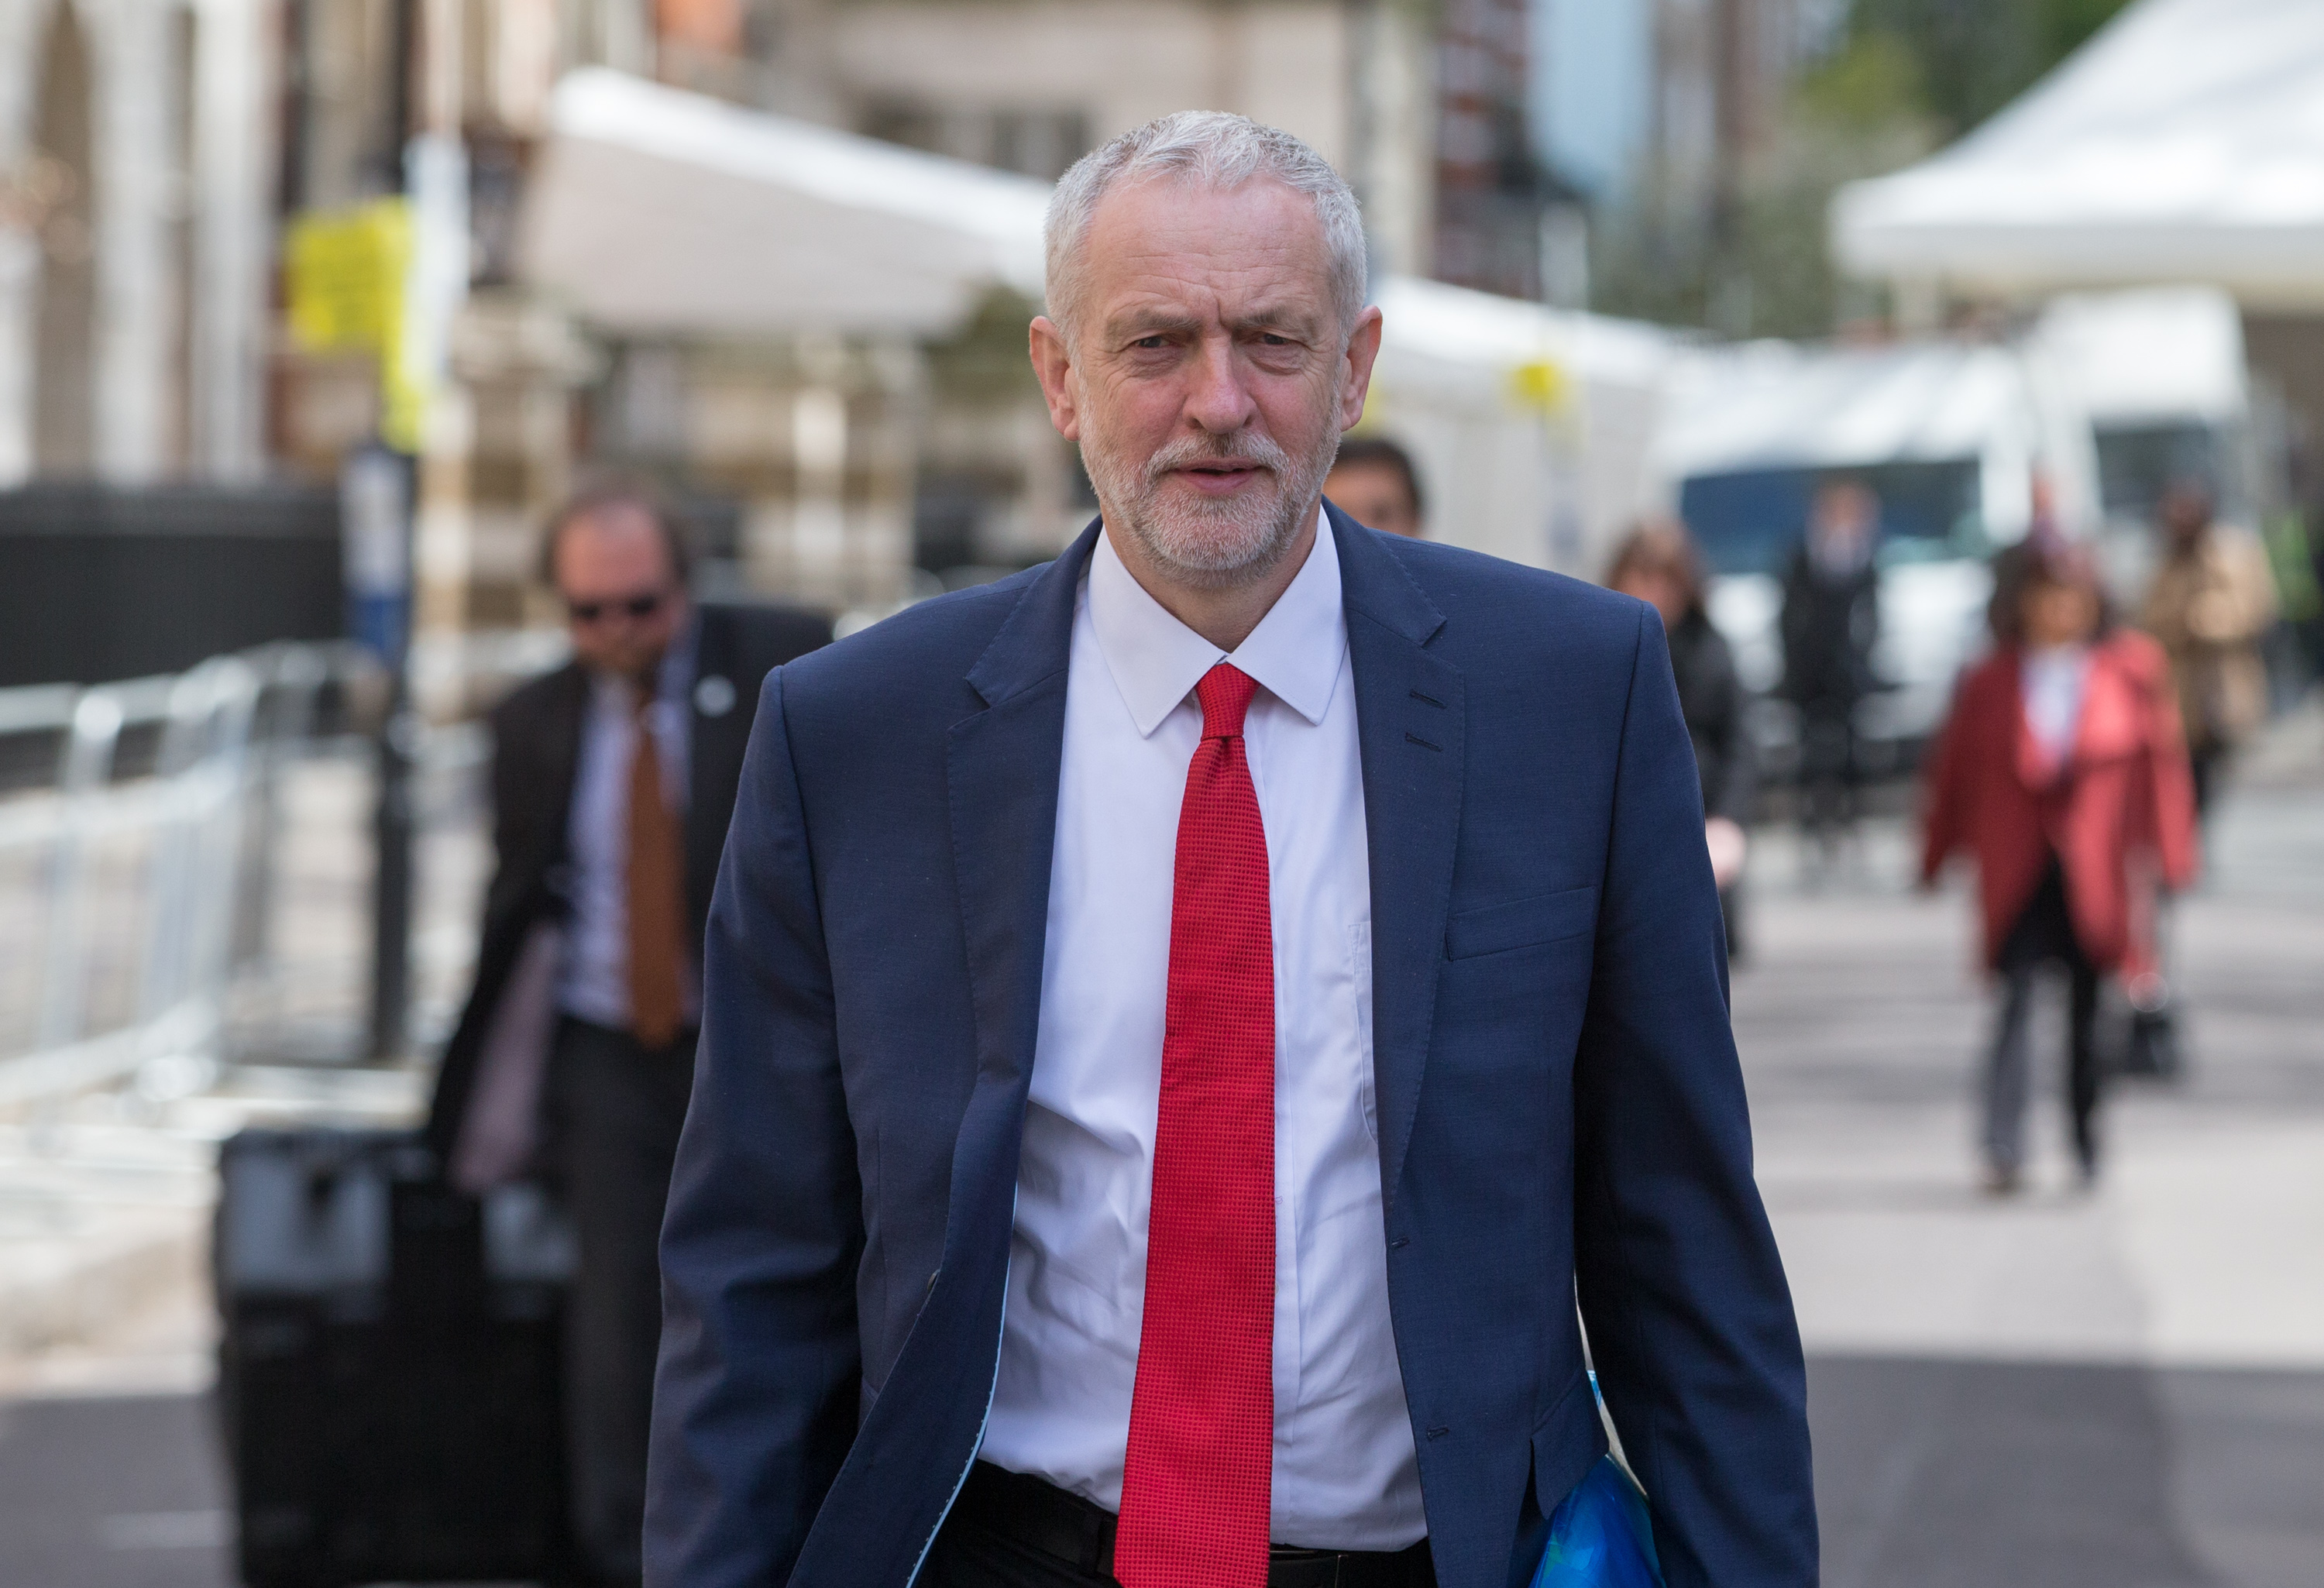 Labour Party leader Jeremy Corbyn leaves after meeting with US President Barack Obama after he spoke at the Royal Horticultural Halls in London on April 23, 2016.